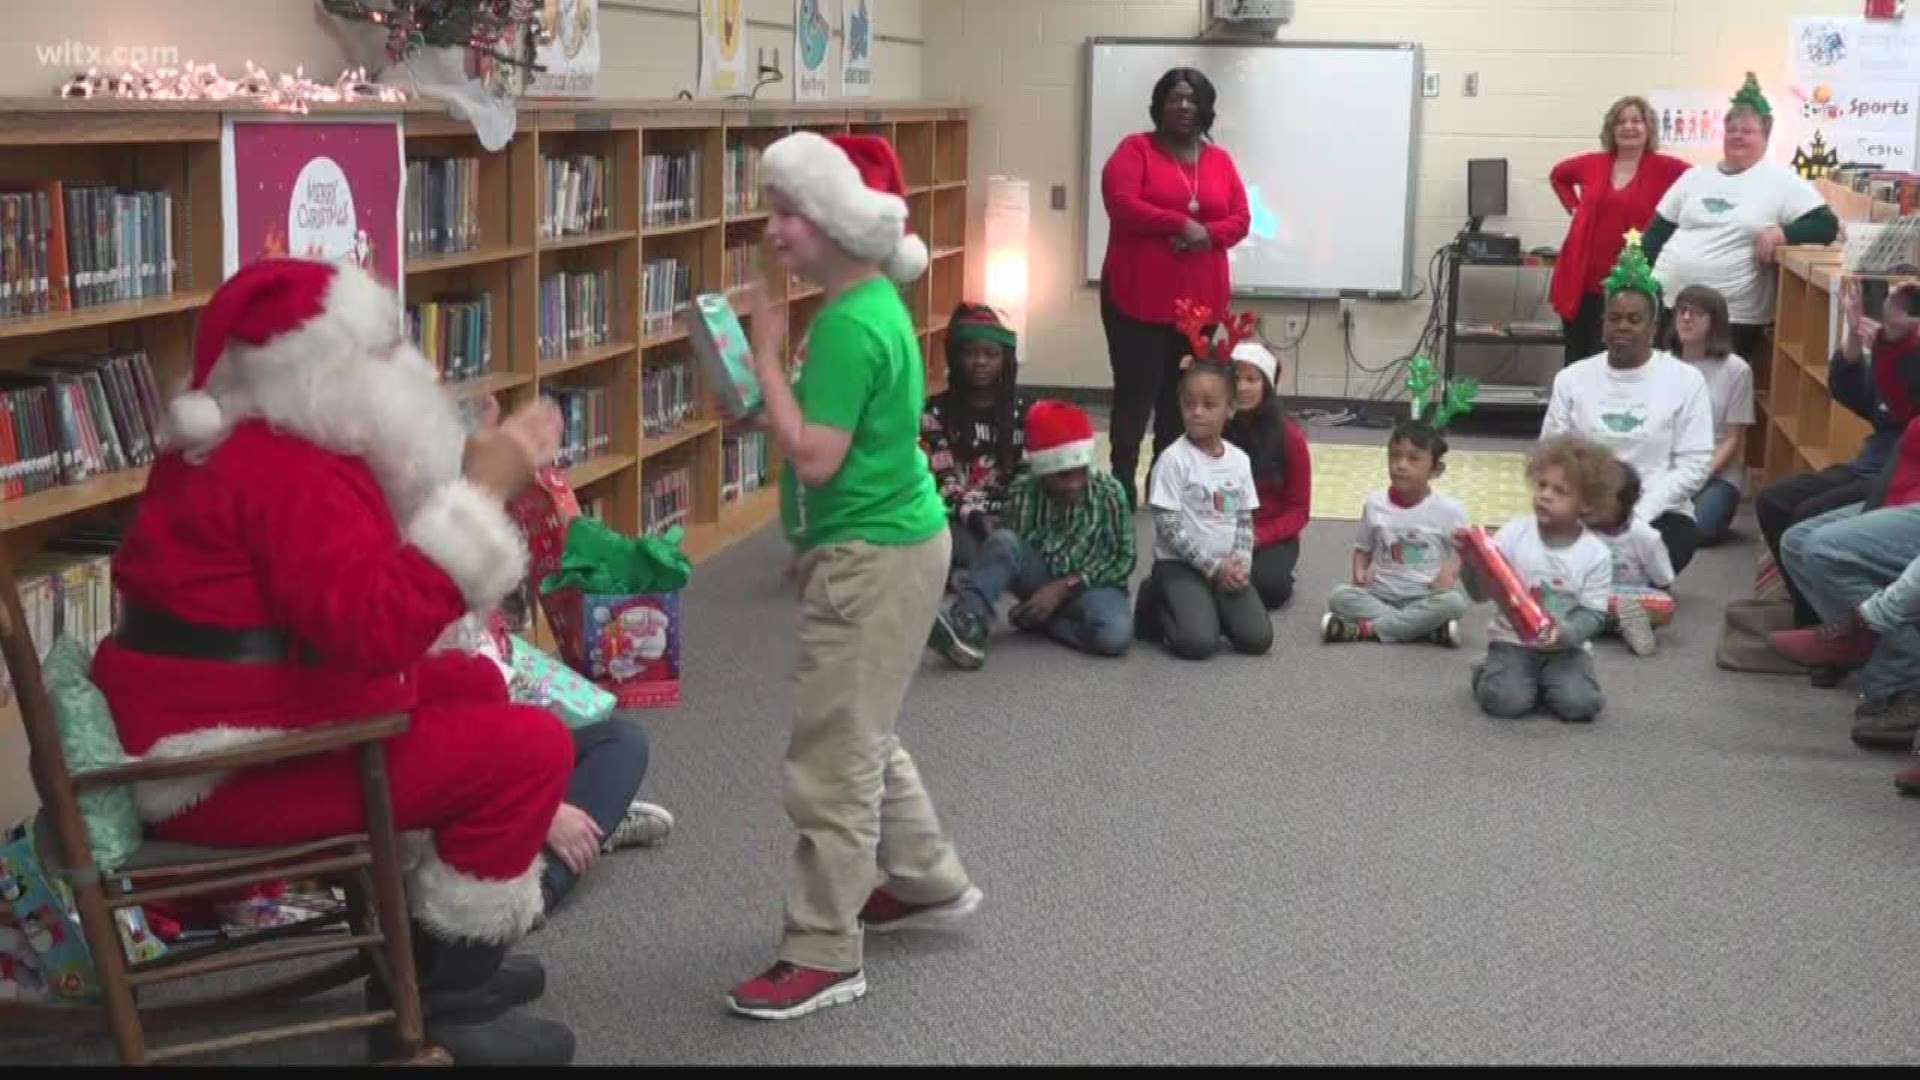 Each student gets a toy and the opportunity to interact with Santa